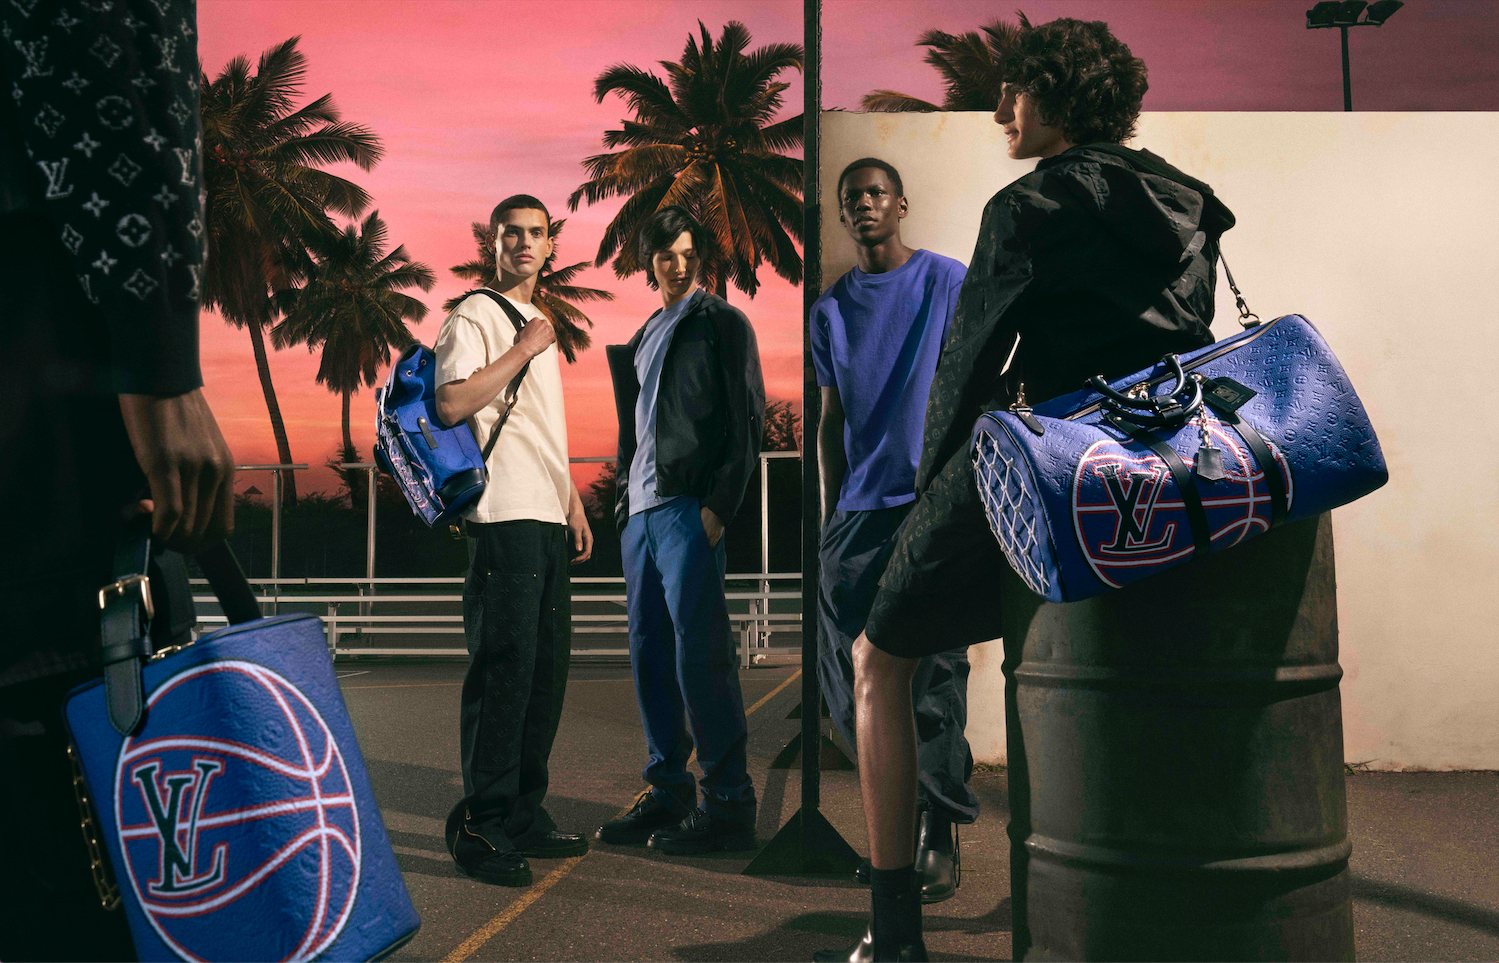 Louis Vuitton flexes NBA prowess in third collection — Hashtag Legend